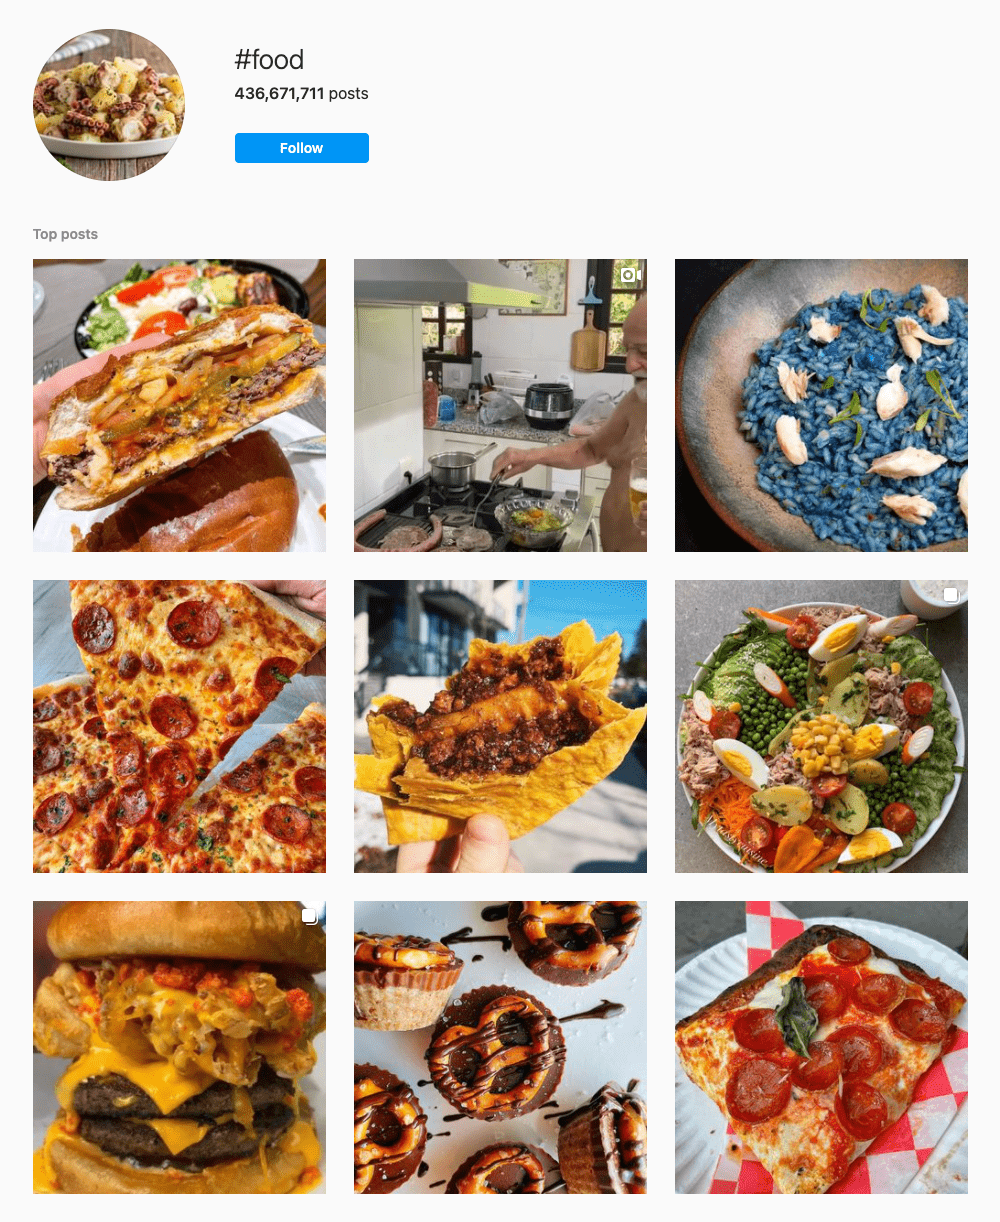 #food Hashtags for Instagram